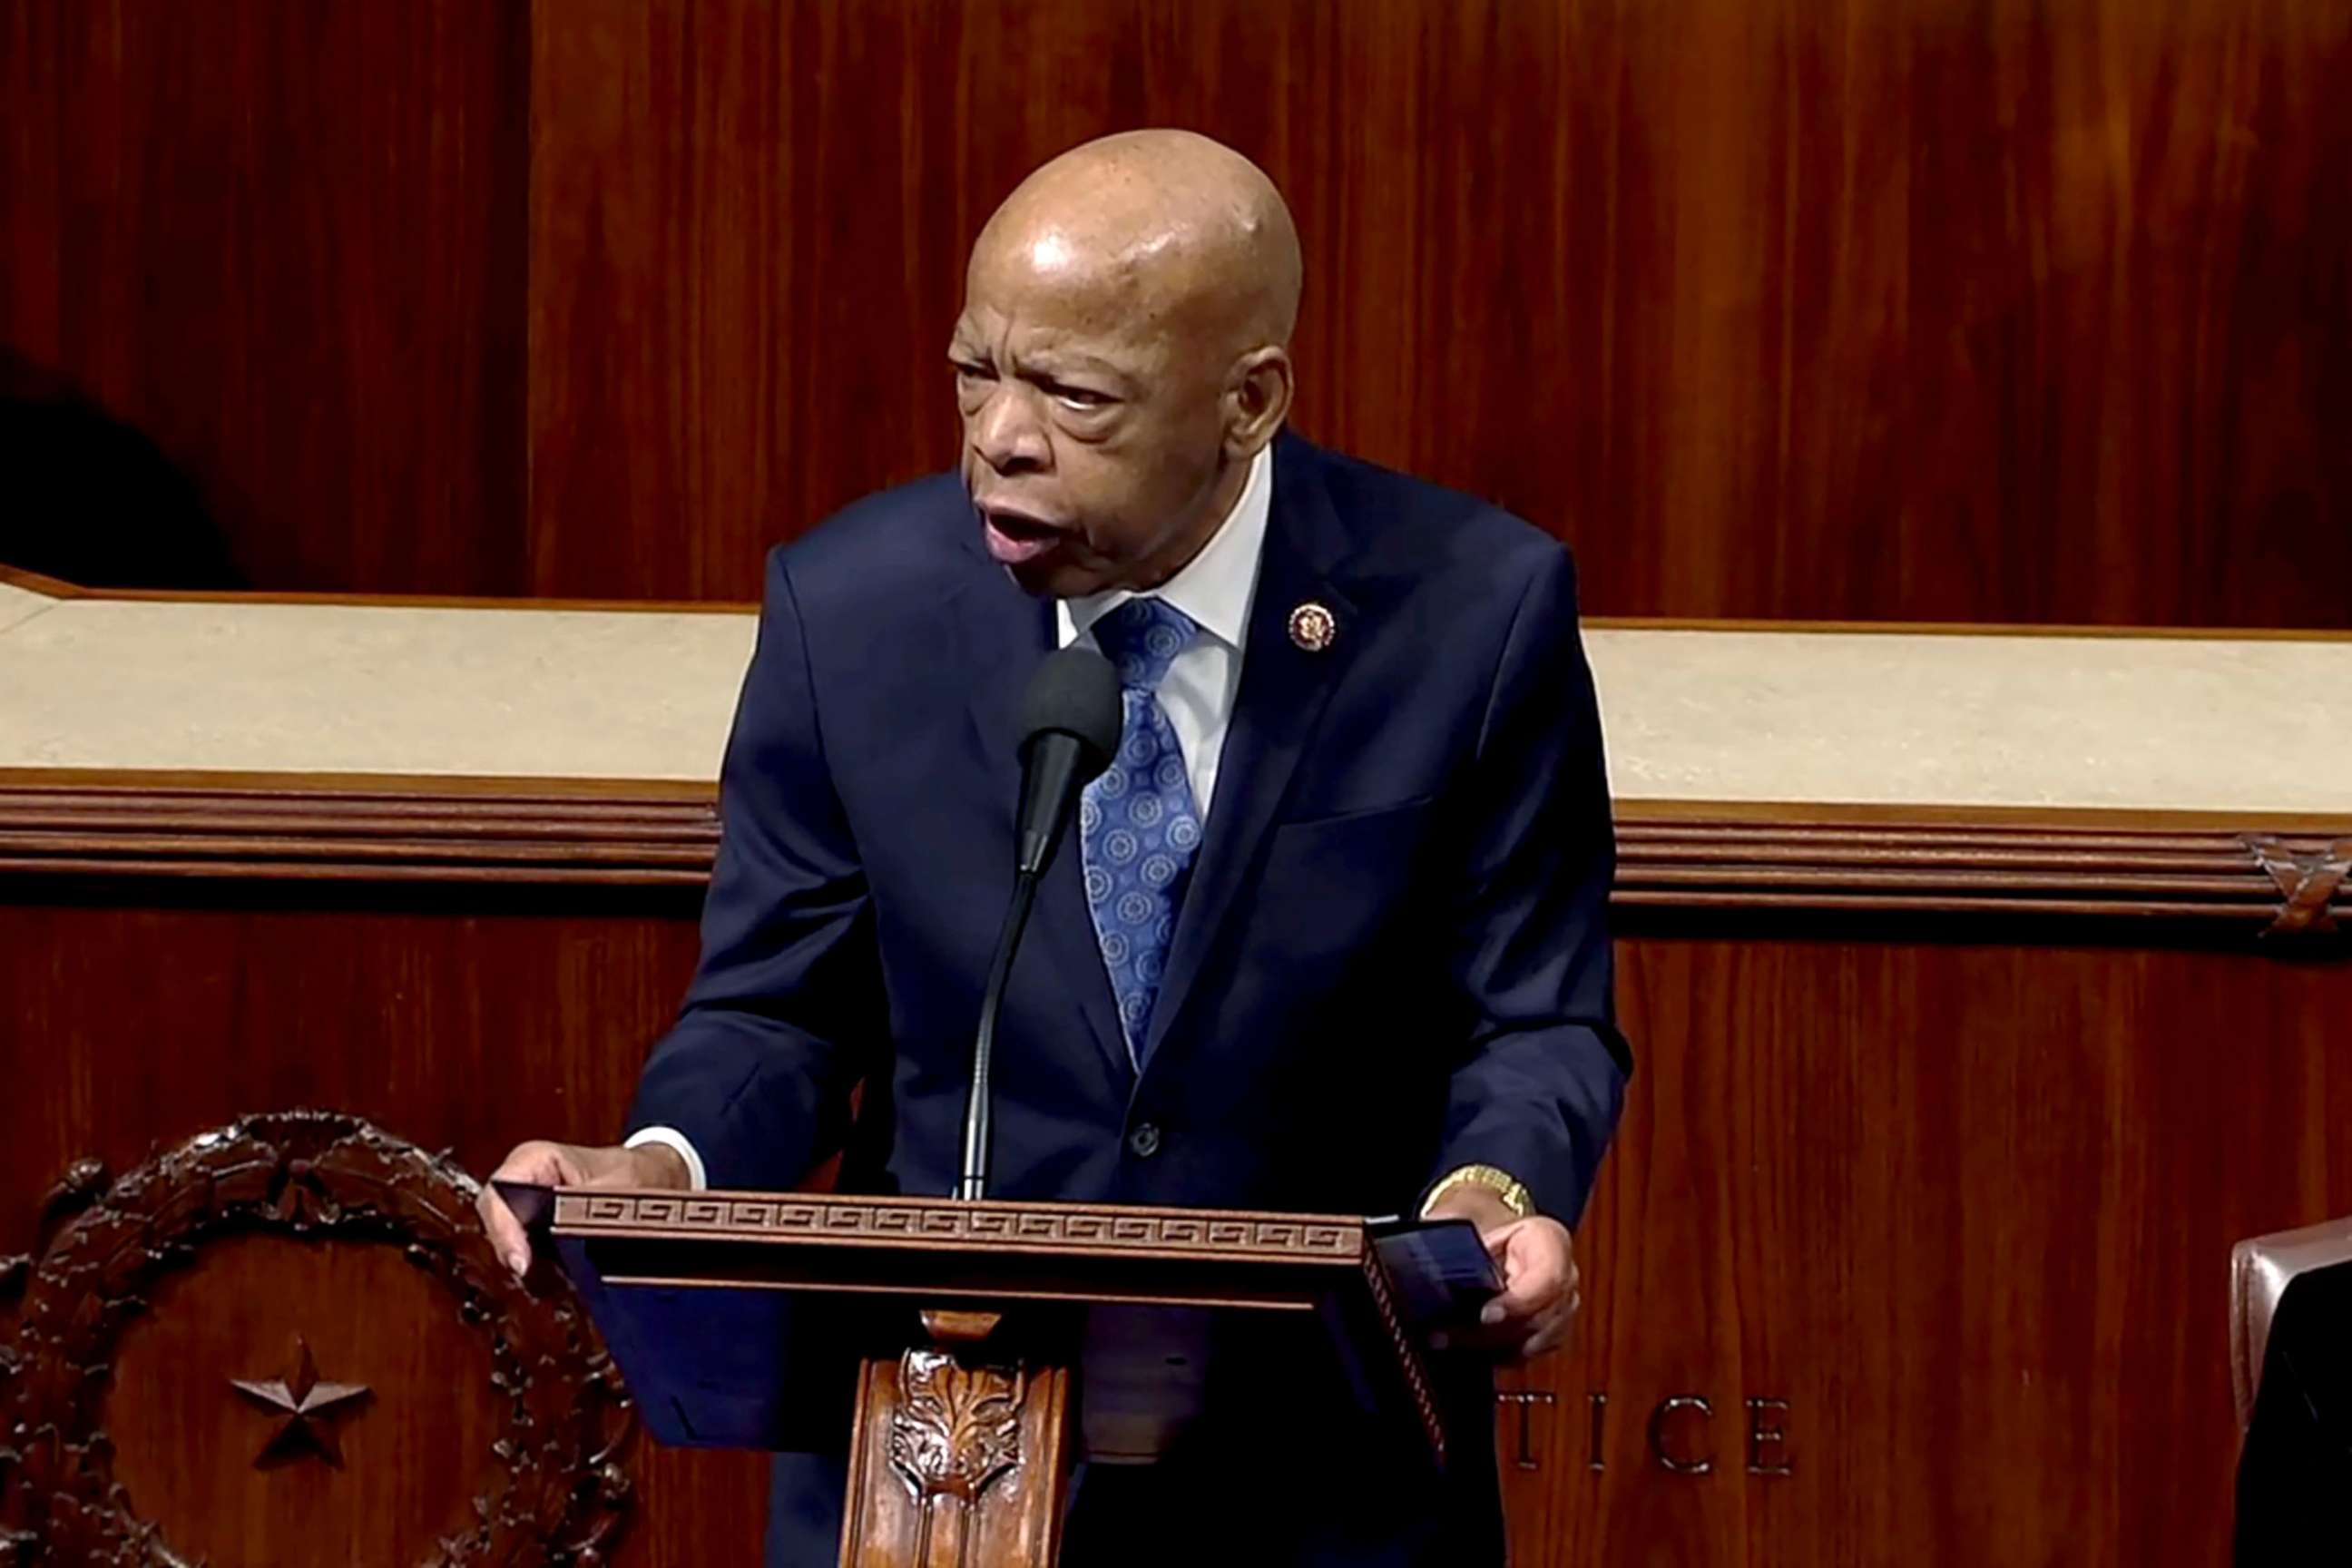 PHOTO: Rep. John Lewis speaks ahead of a vote on two articles of impeachment against President Donald Trump on Capitol Hill, Dec. 18, 2019, in Washington, D.C.